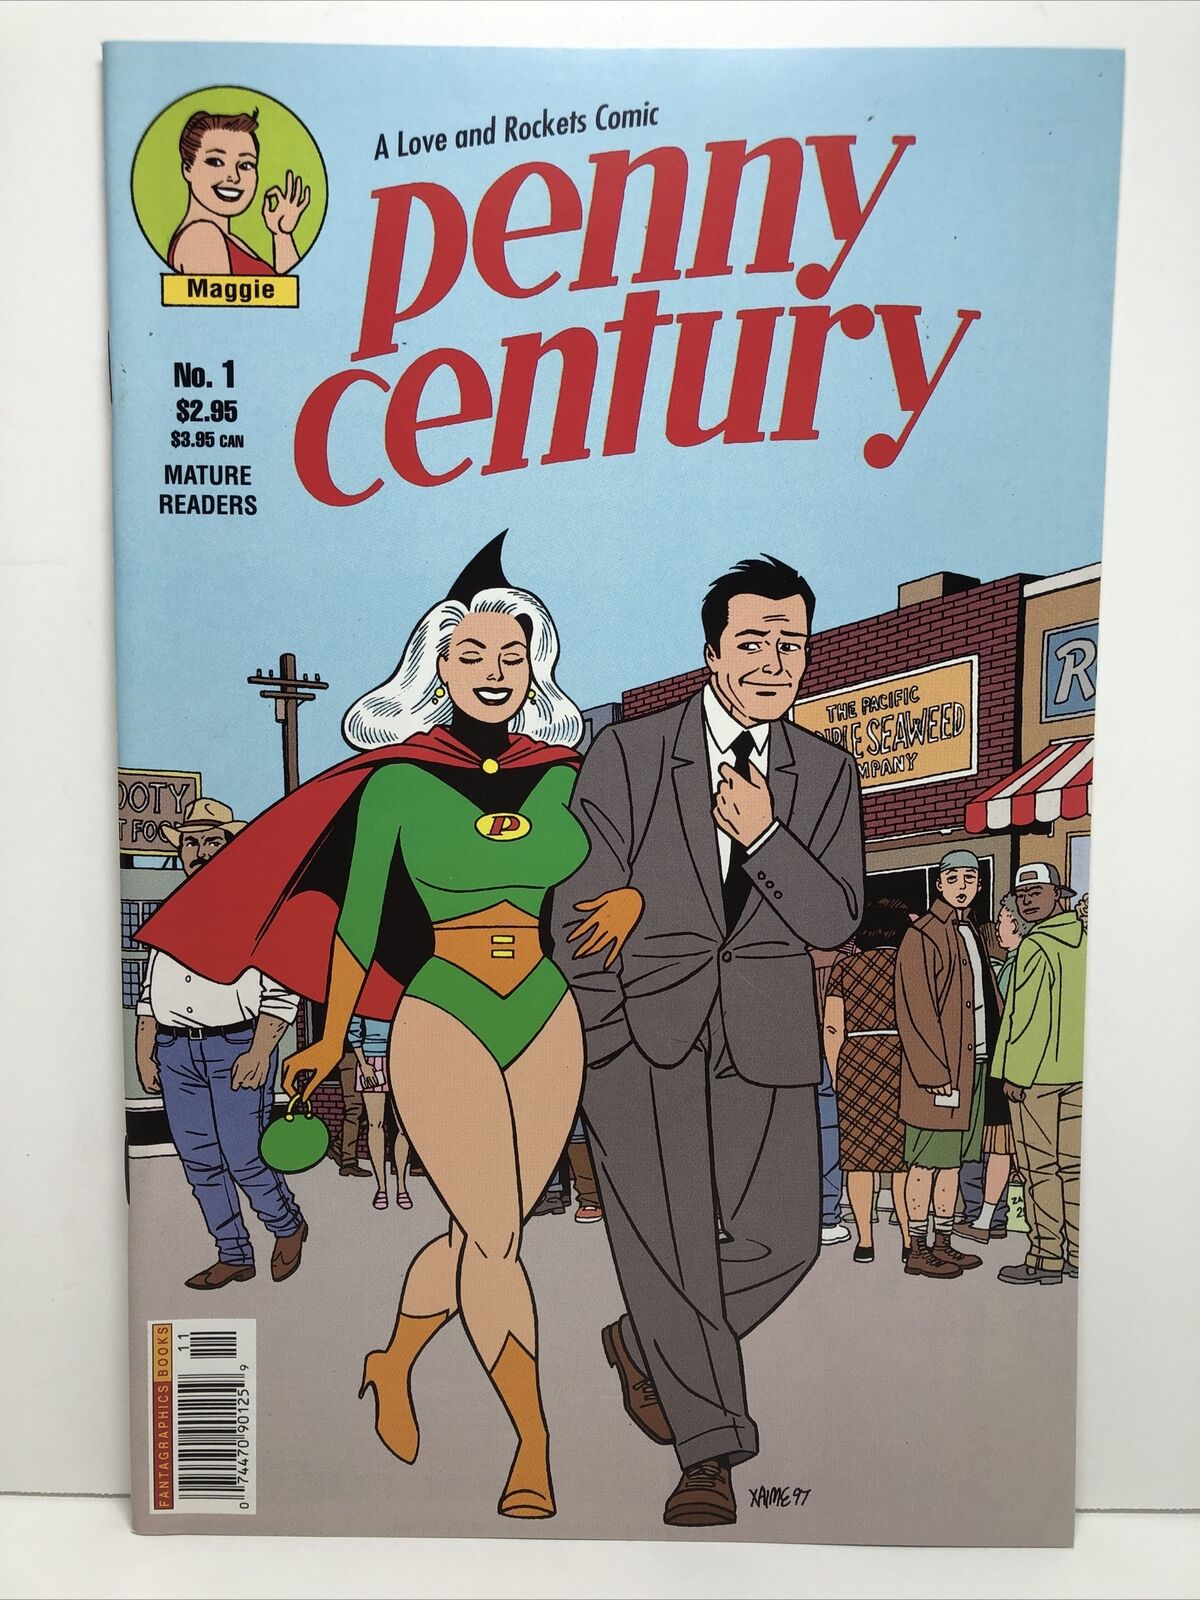 A Love And Rockets Comic PENNY CENTURY #1 Fantagraphics 1997 Mature Readers VF